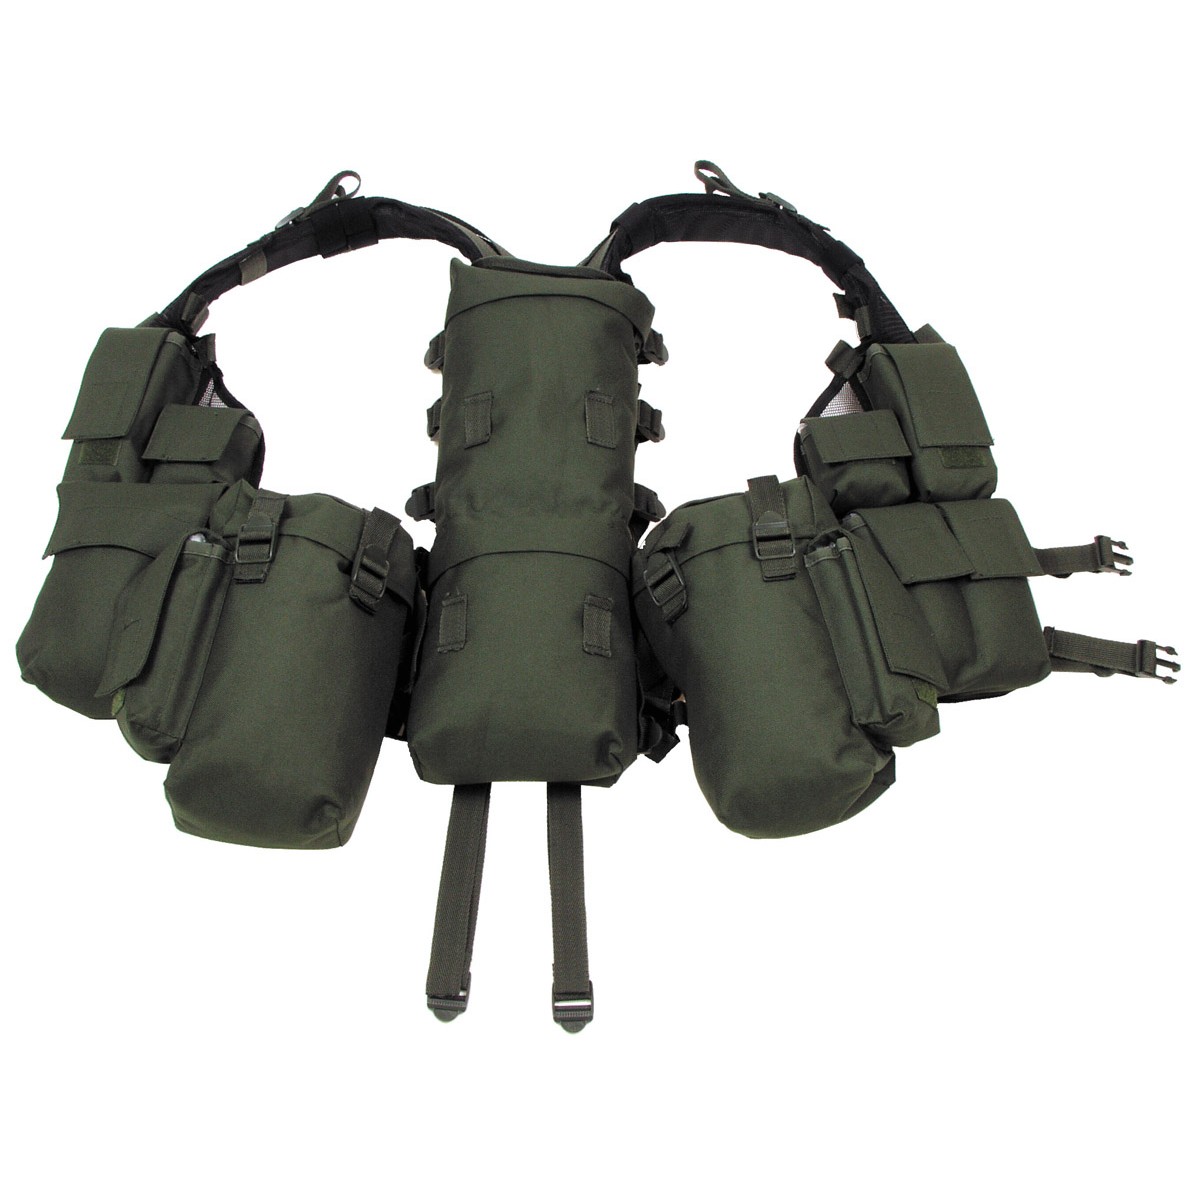 Military Spec Ops Tactical Vest with Various Pockets - OD Green